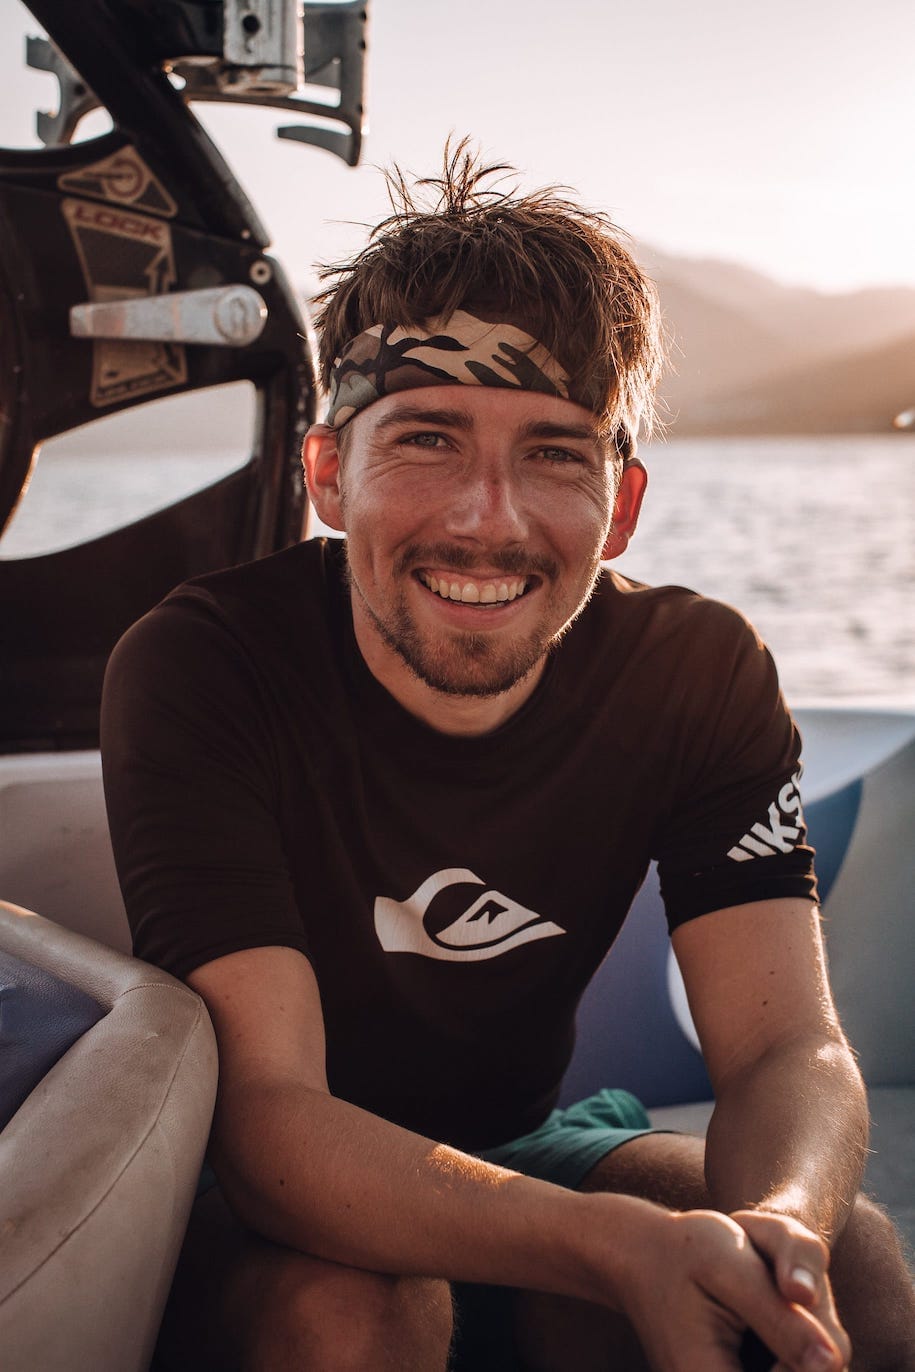 A picture of me sitting on a boat and smiling at the camera